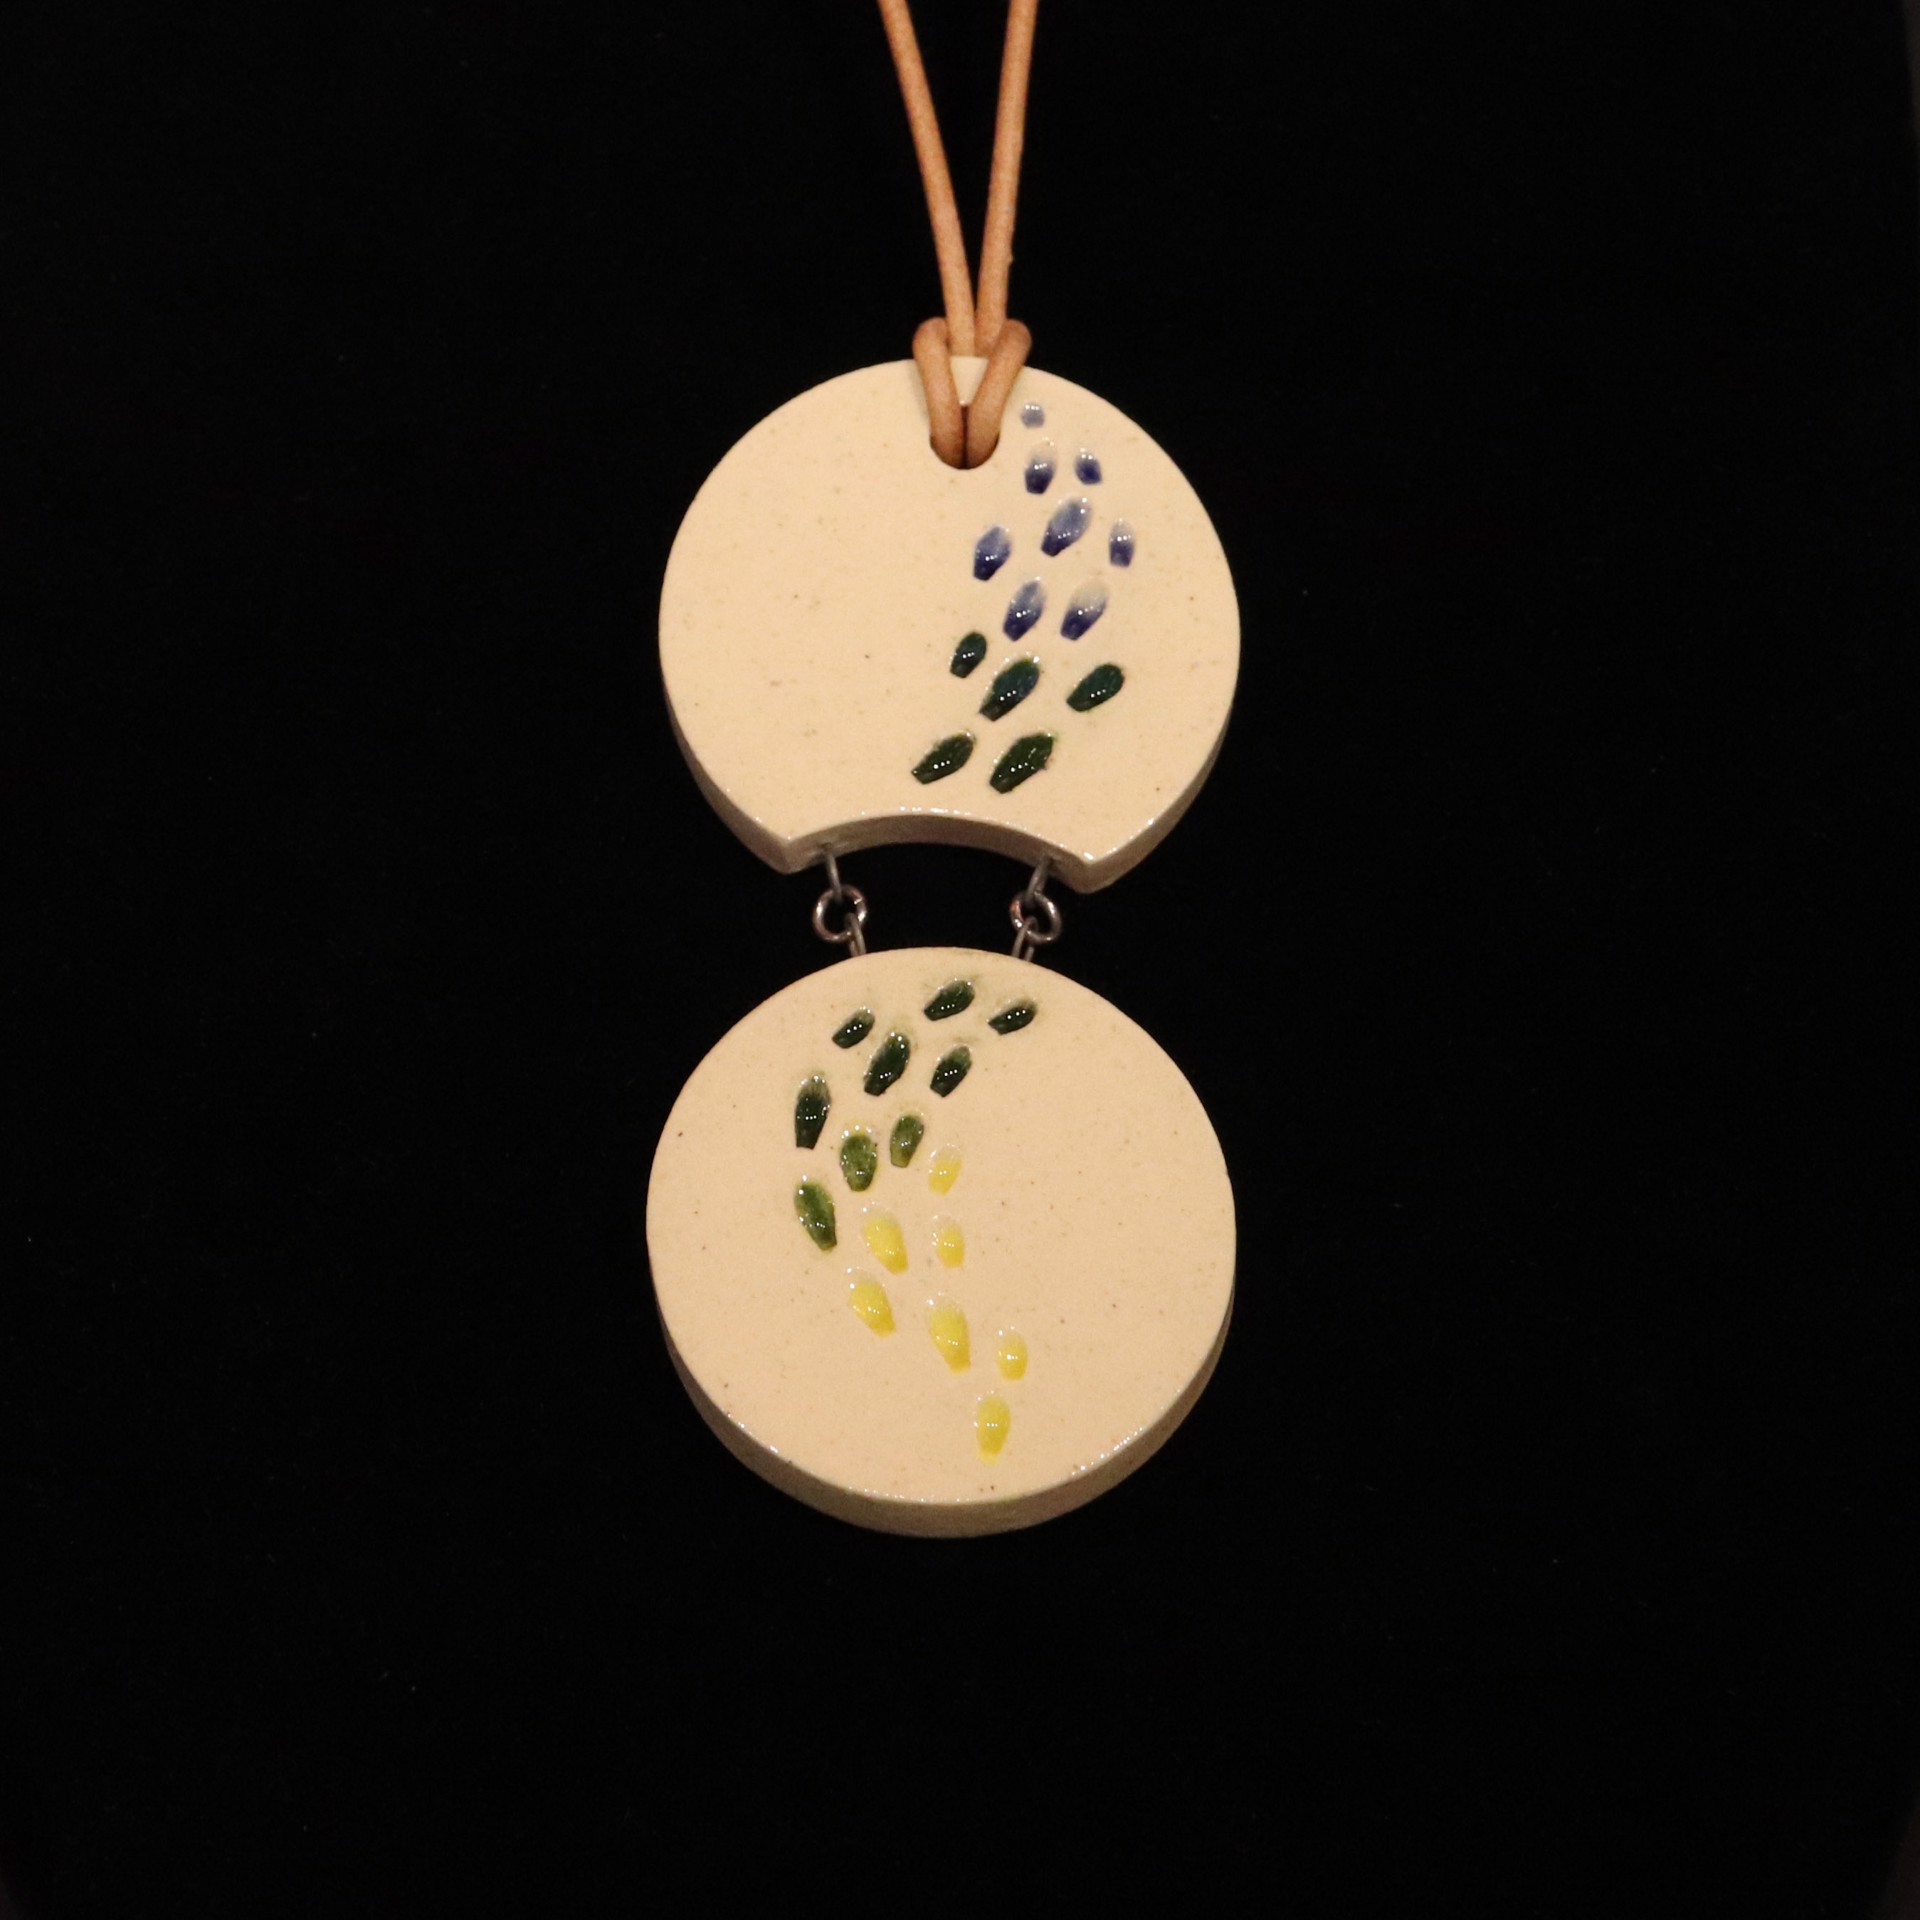 T3 Necklace by Erin O'Loughlin